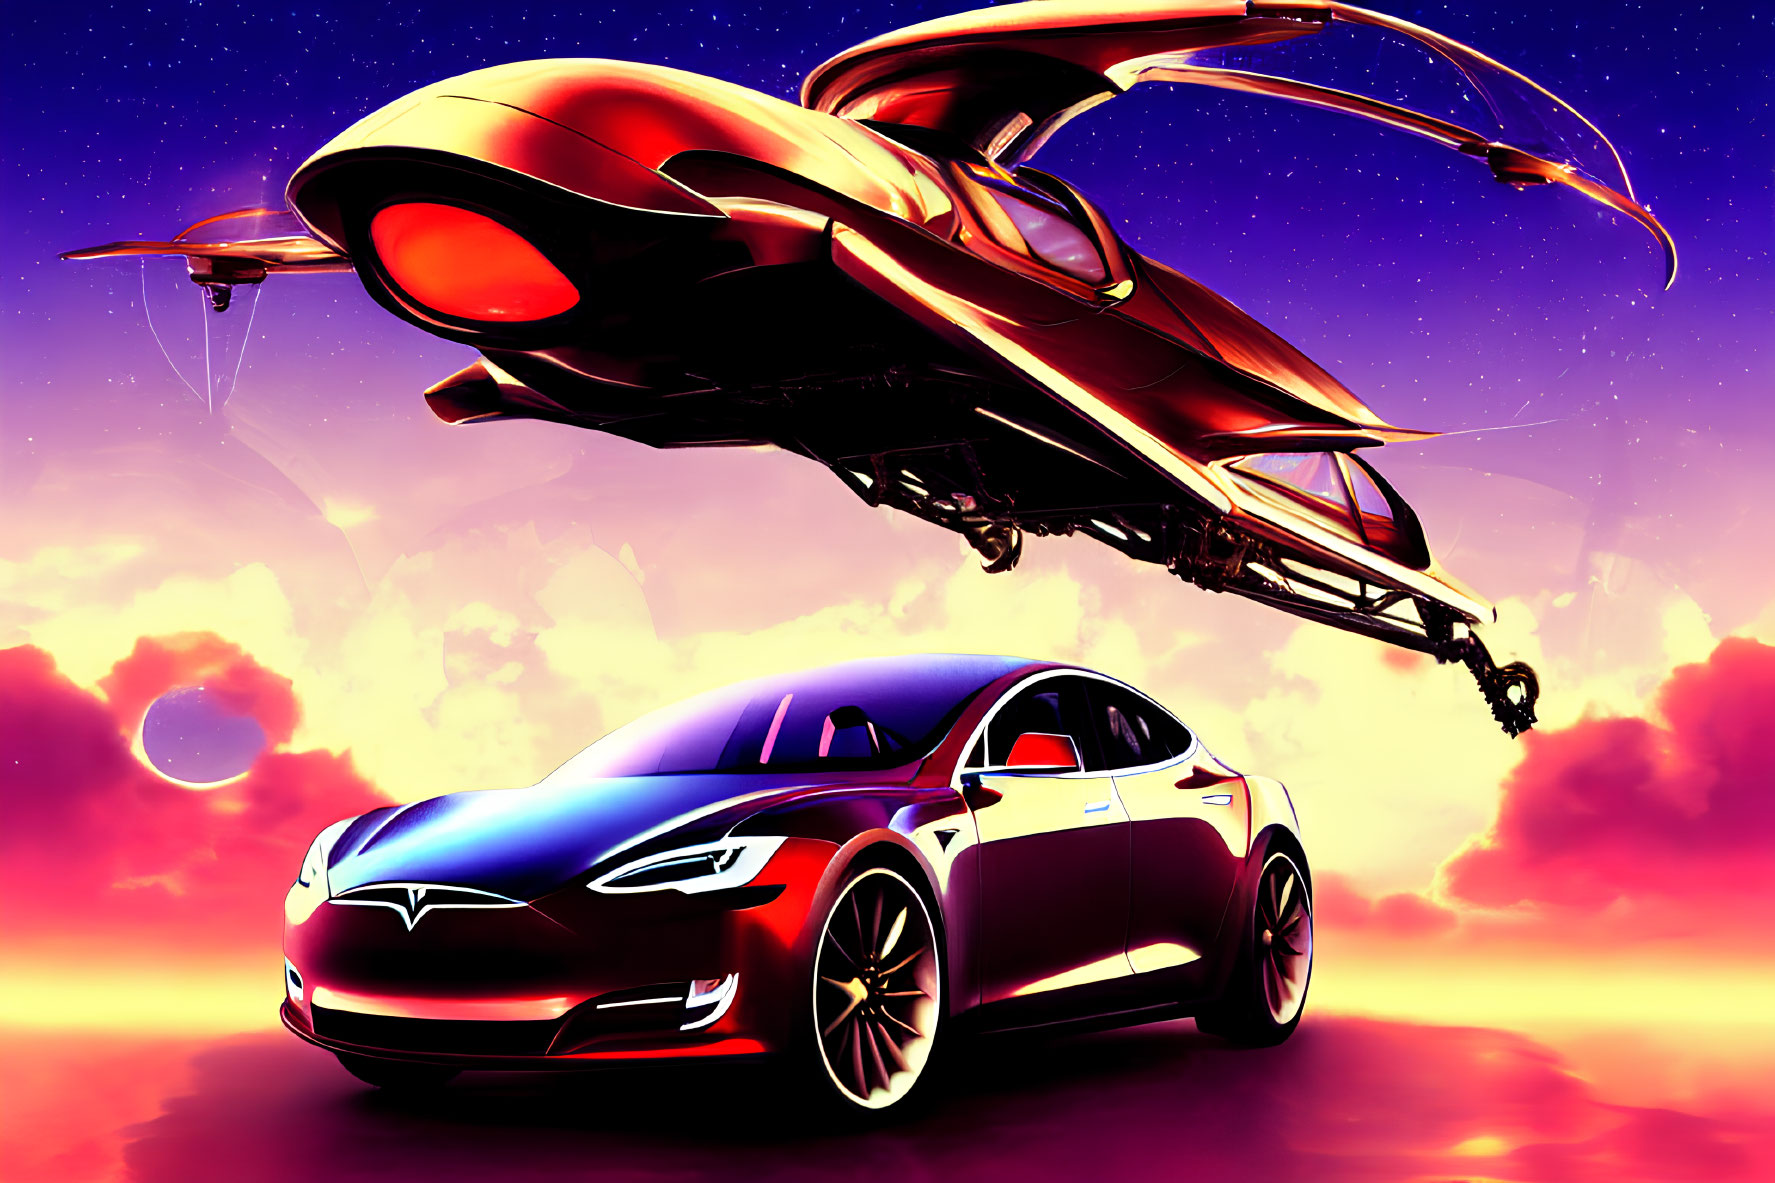 Futuristic red spaceship and Tesla car under vibrant sky